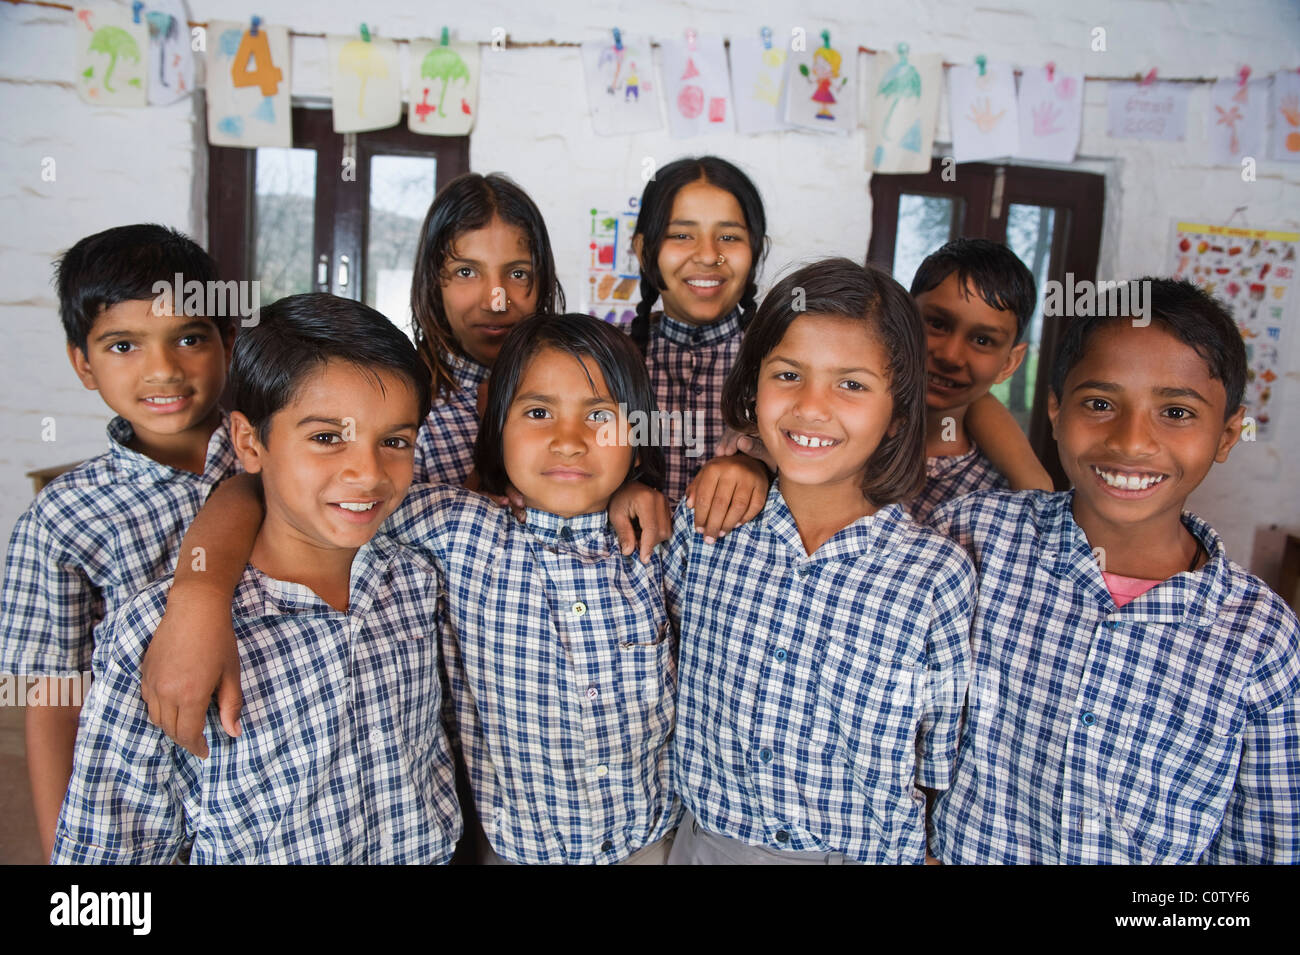 Portrait of students smiling together Stock Photo